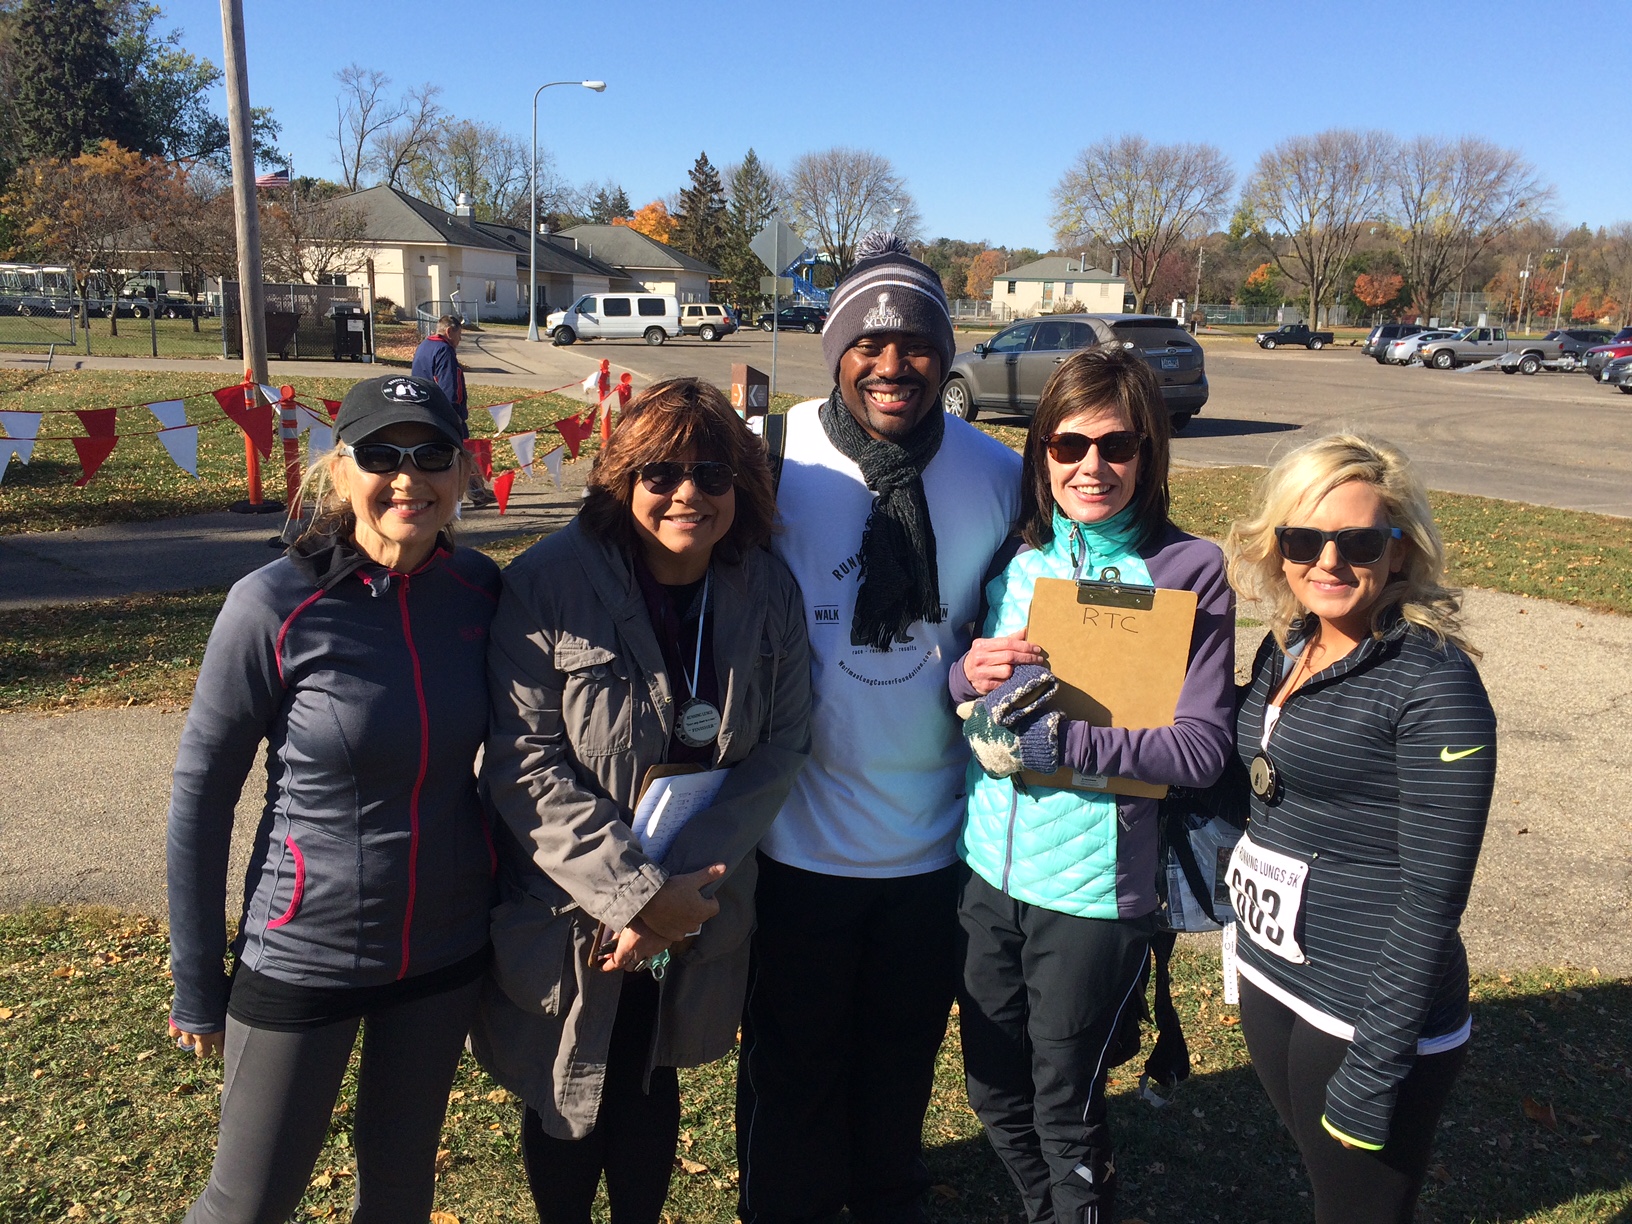 NFL Chris Draft attends Running Lungs Rochester in support of catching lung cancer in time.JPG